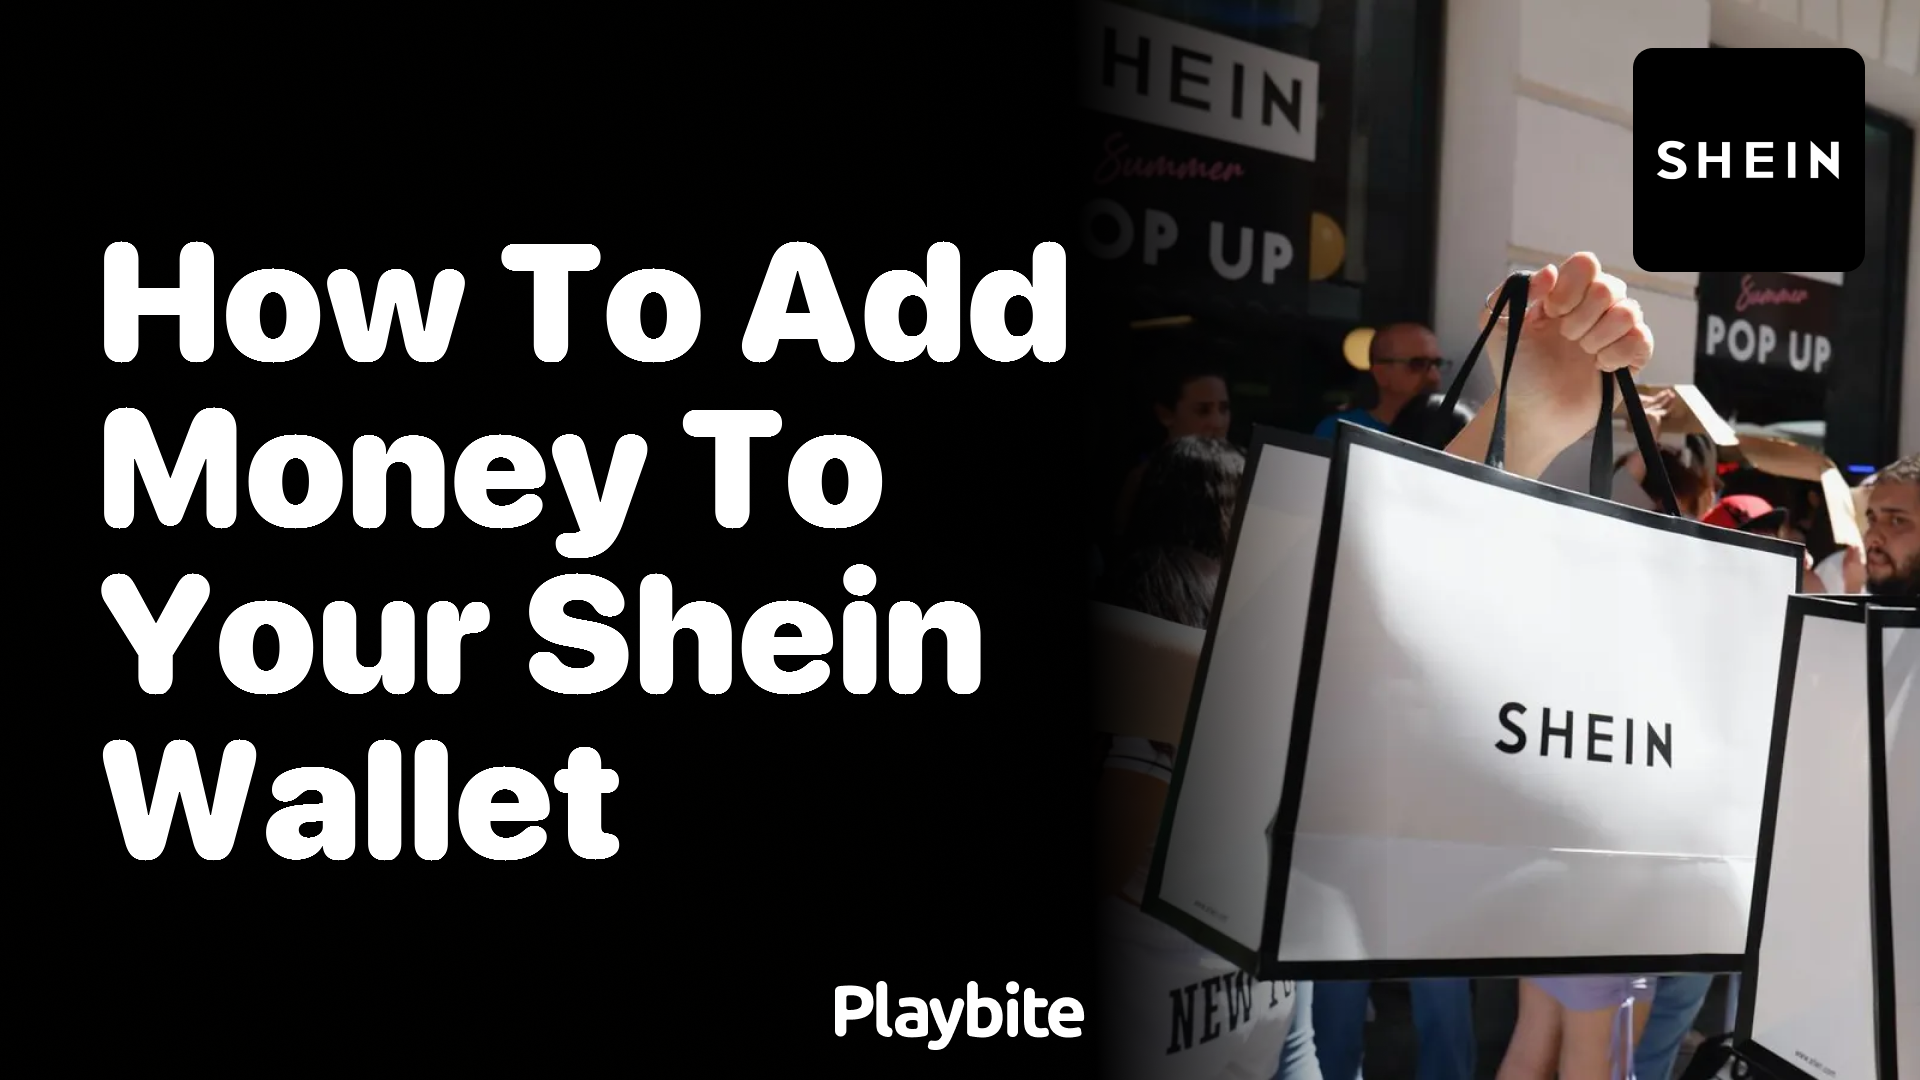 Get $300 on shein wallet just search the code mi1pii and play the game : r/ Shein